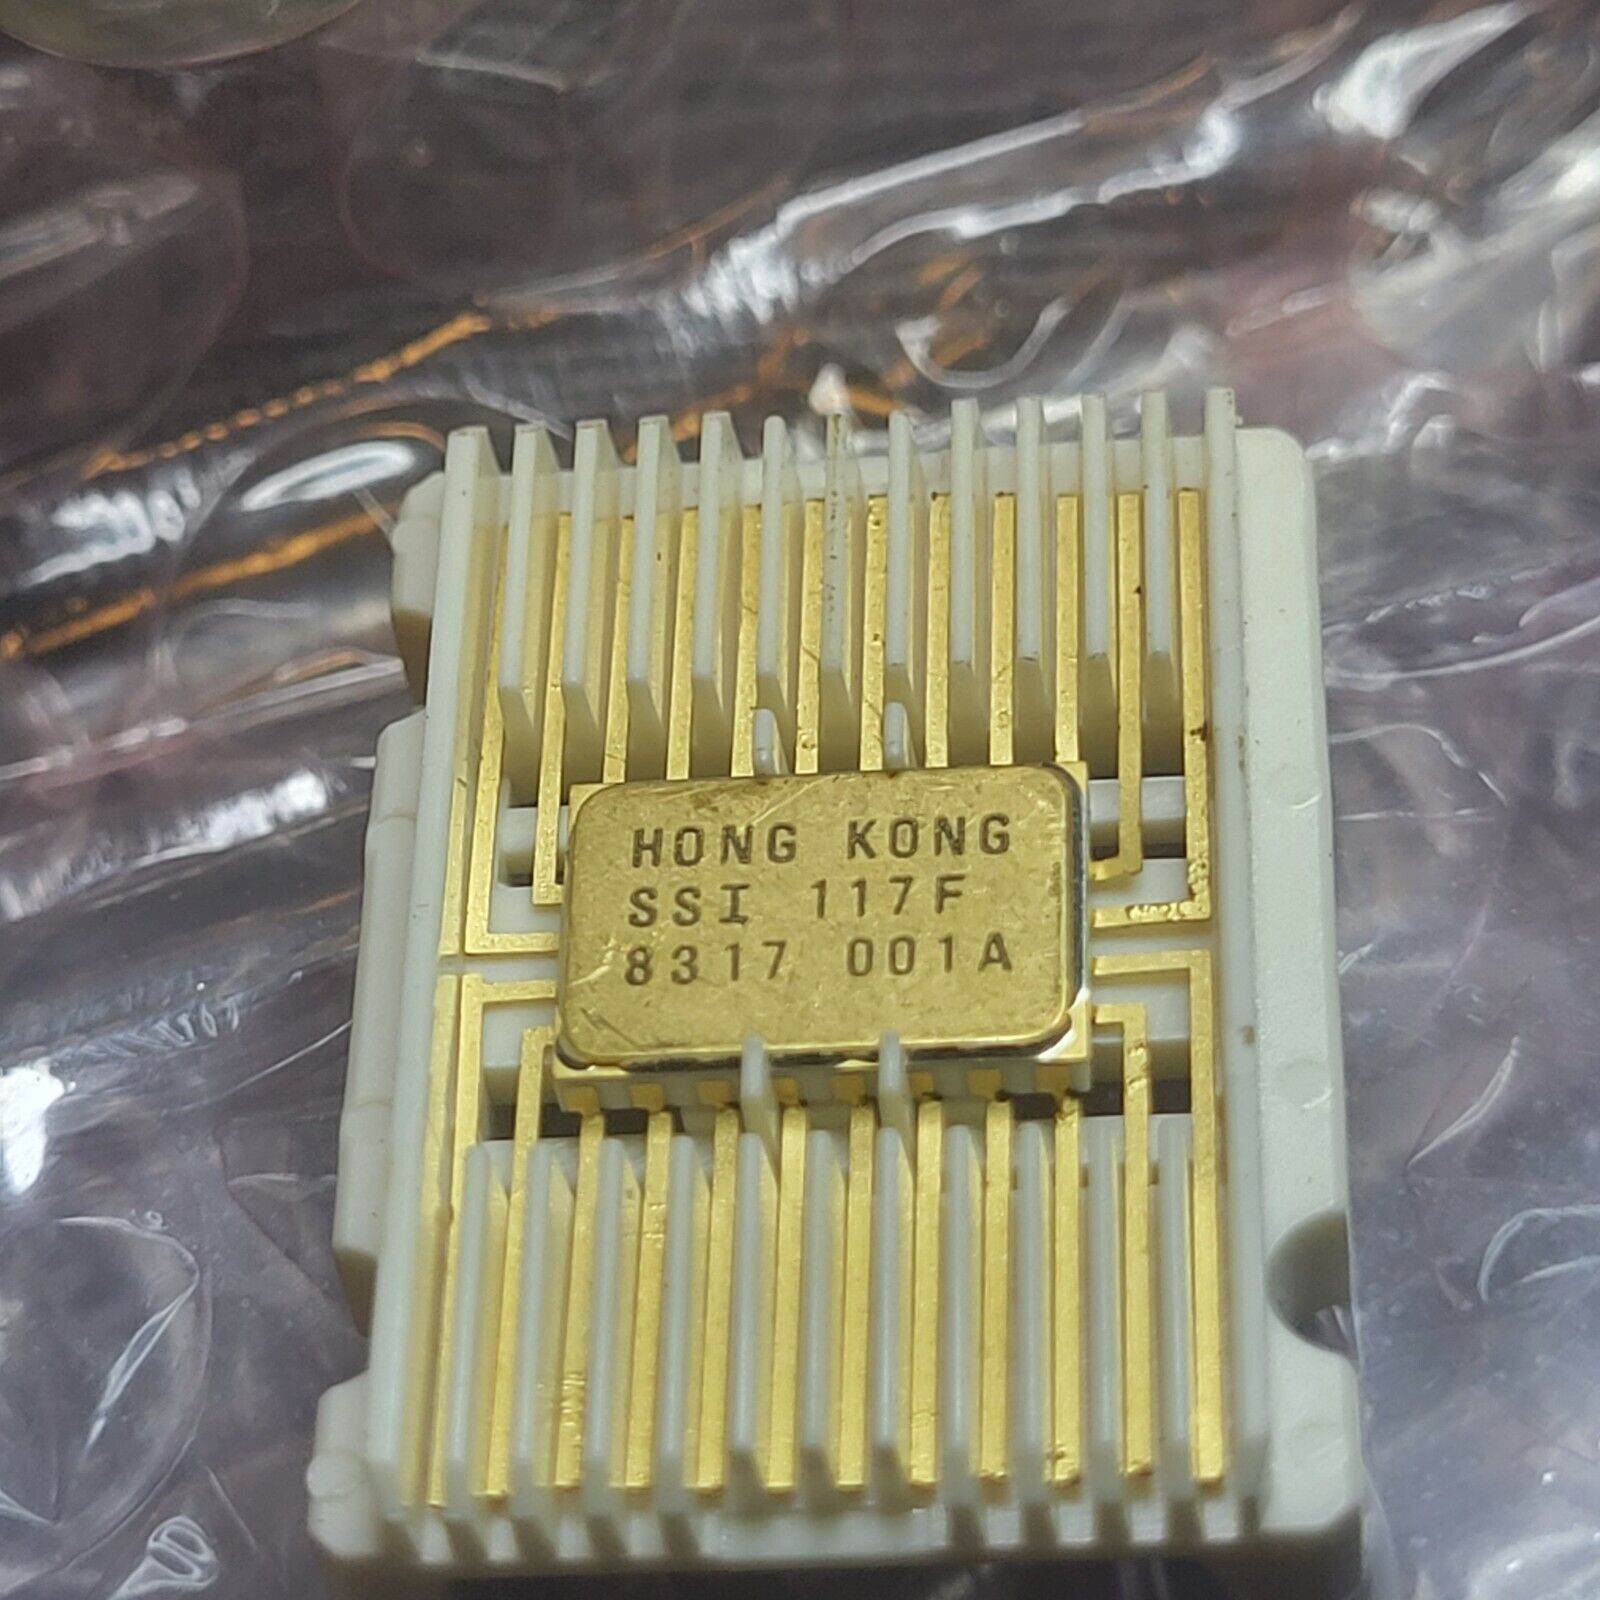 SSI 117F GOLD SEMICONDUCTOR 8317 DATE CODE RARE VINTAGE IC USA  MILITARY NEW $10